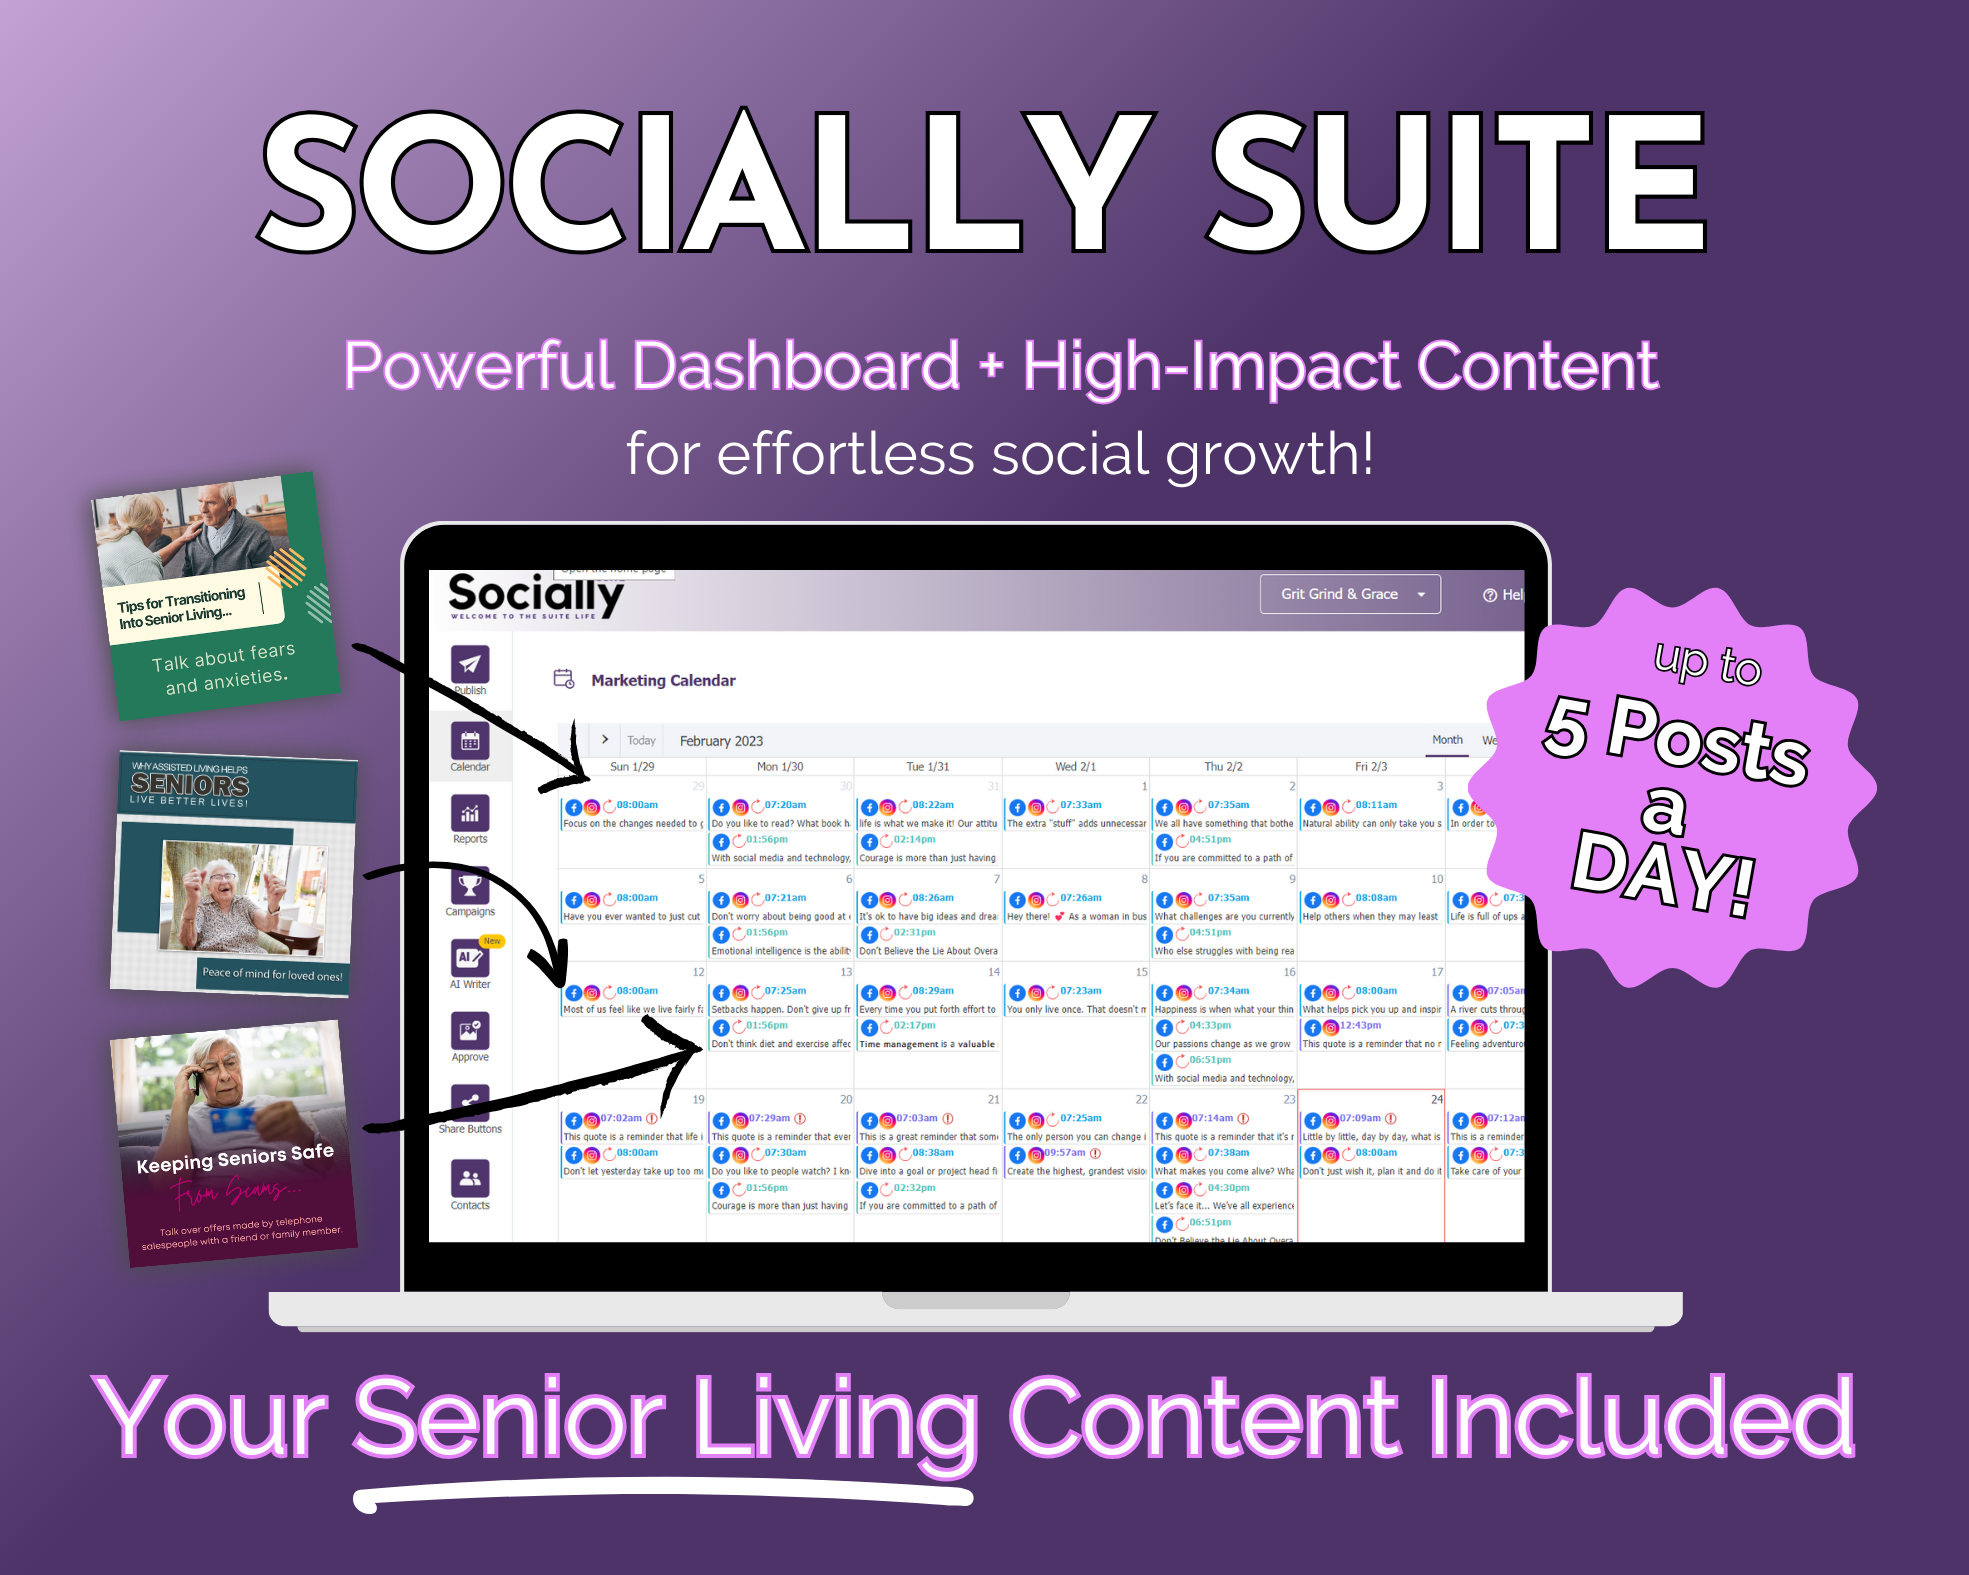 Promotional graphic for Get Socially Inclined's Socially Suite Membership, showcasing a social media marketing content dashboard tailored for senior living content with a promise of up to 5 posts a day.